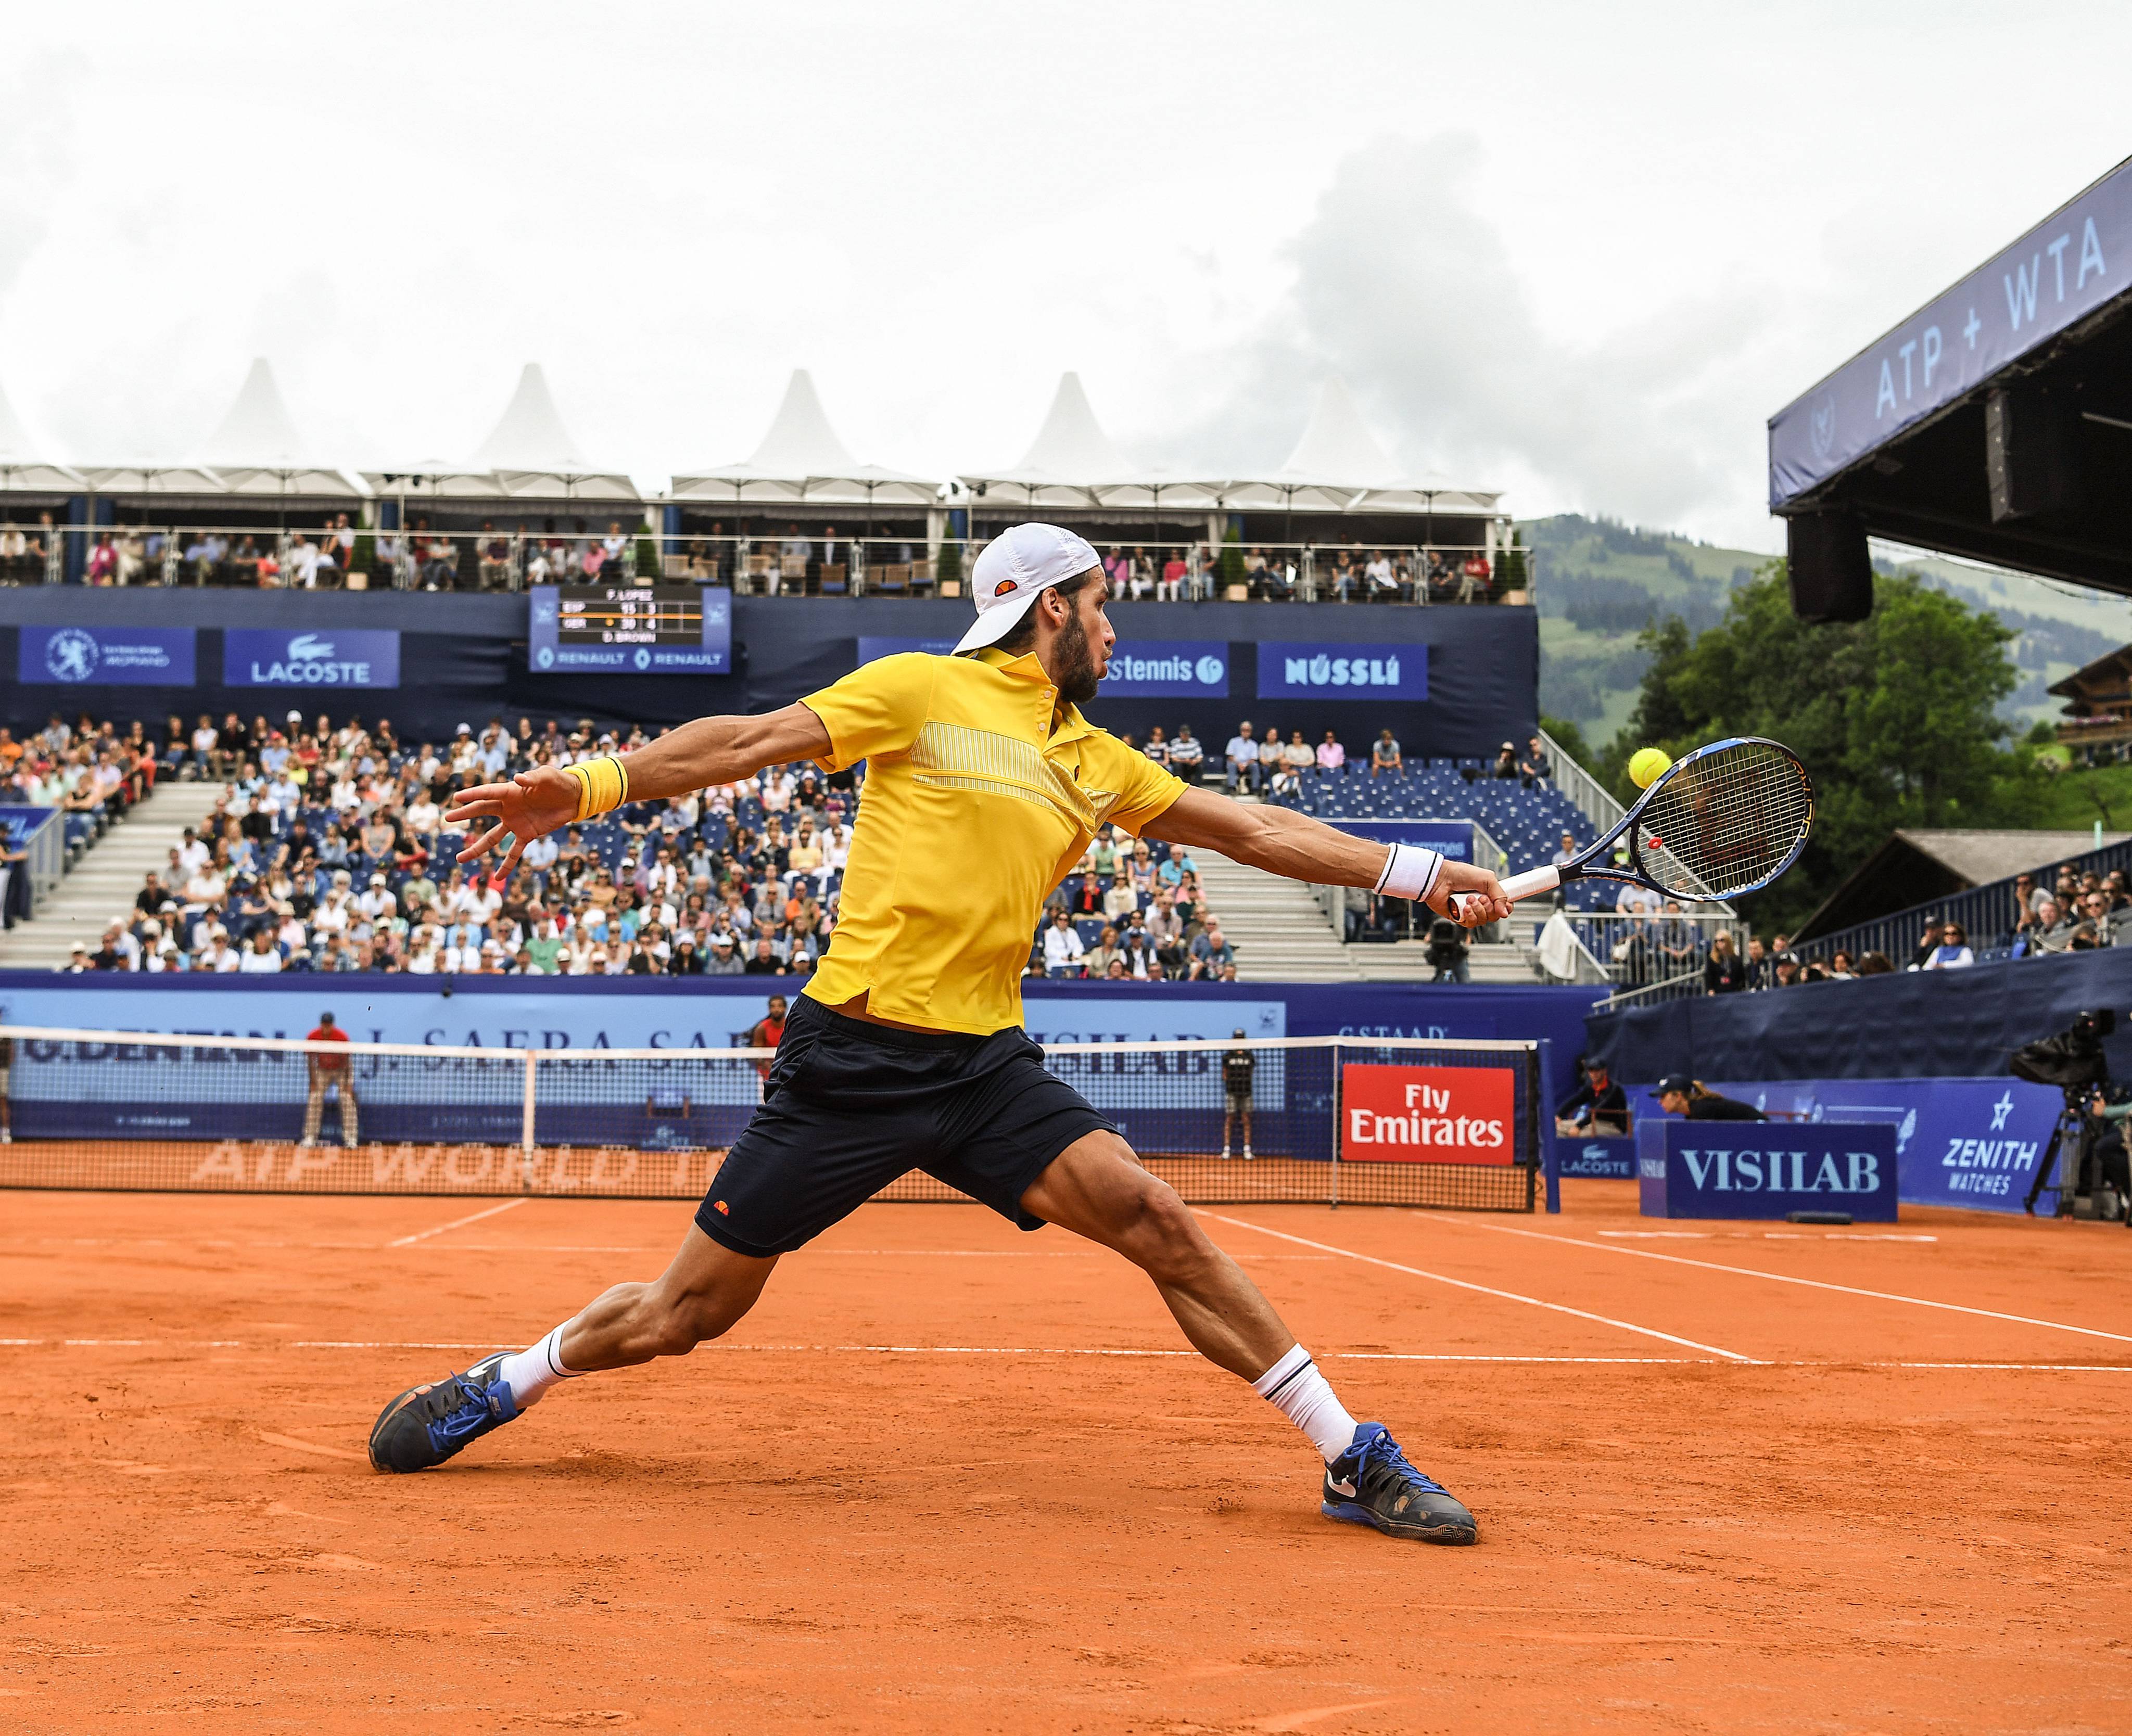 Want to experience the excitement as a spectator or join in yourself?: Other sporting events in Gstaad - Hotel Gstaaderhof